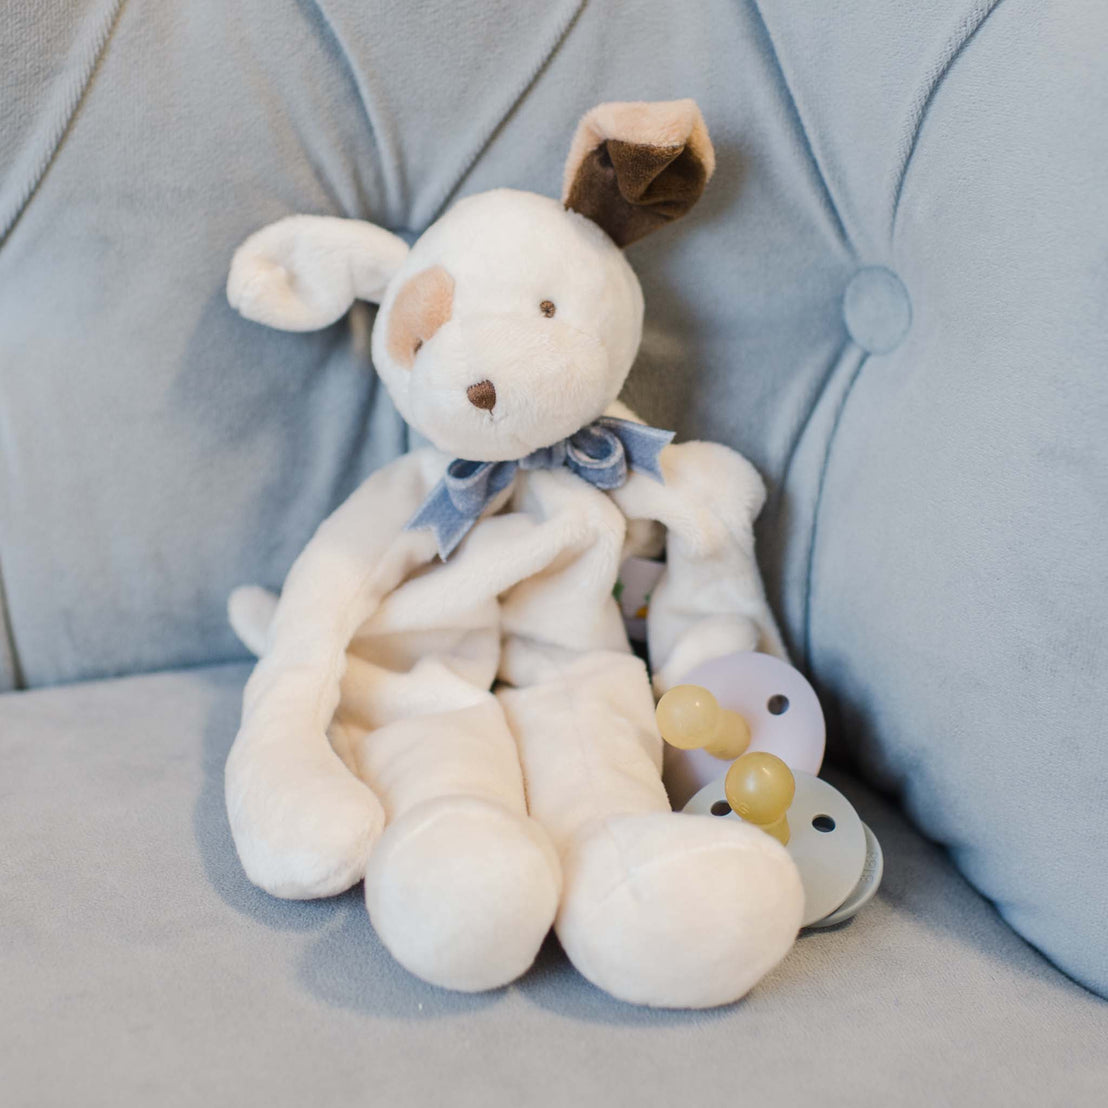 The Ezra Heather Silly Puppy Buddy stuffed animal sitting on a couch. This stuffed animal serves as a pacifier holder